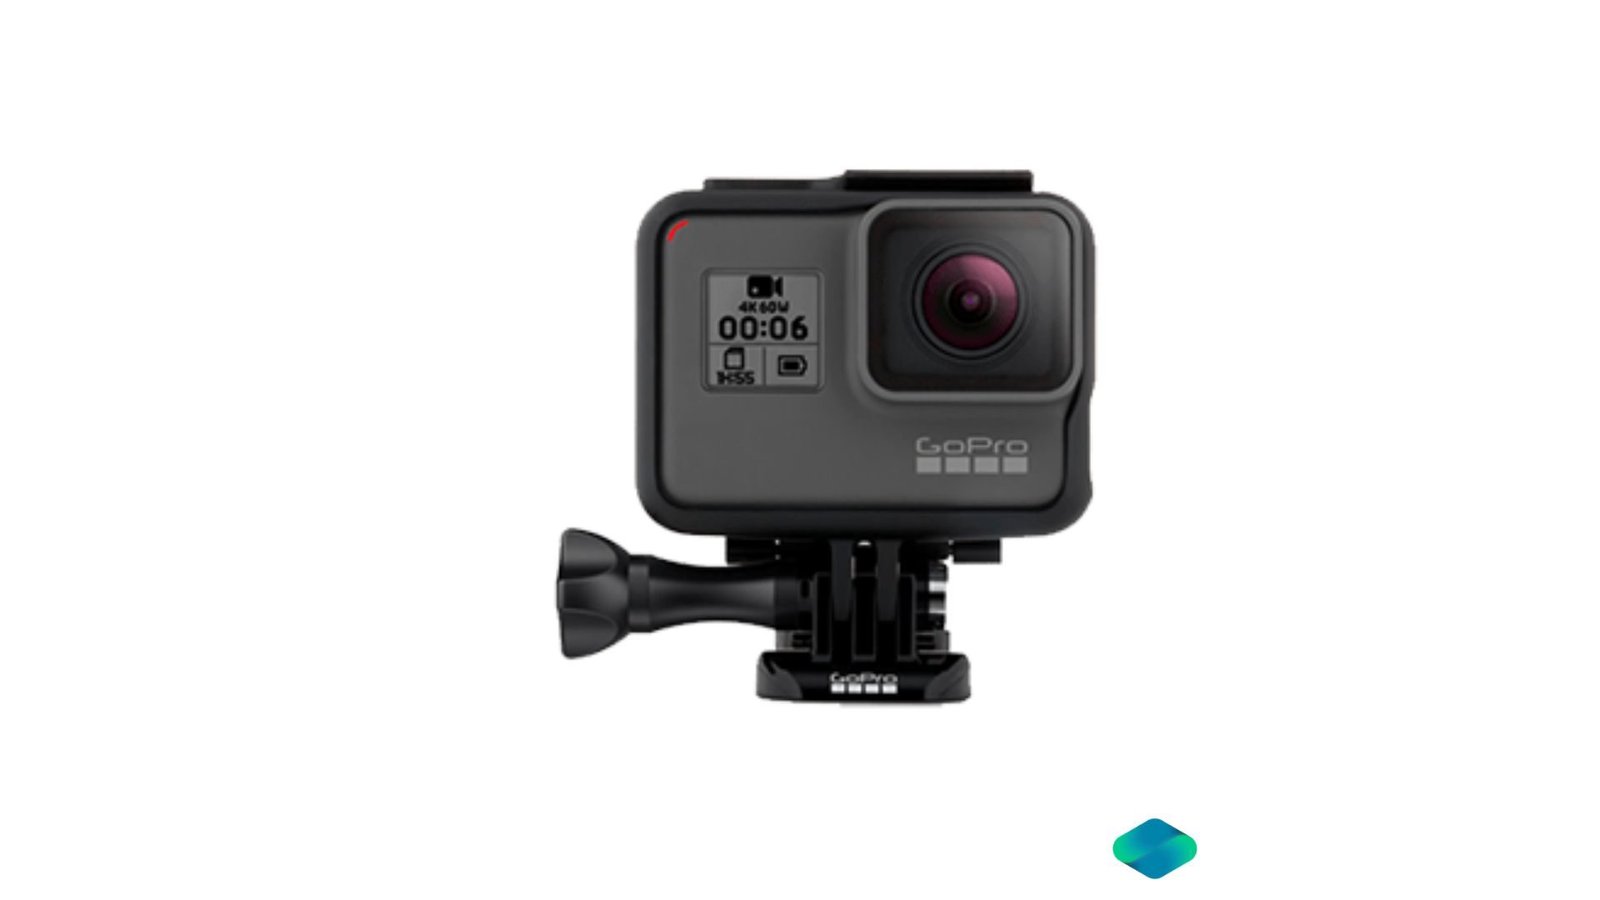 Rent GoPro Hero 6 Camera With All Accessories in Delhi NCR, Camera accessories, Camera lenses for rent, in Delhi Gurgaon Noida, hire Shooting equipment, Lighting equipment rental, Film gear rental for Video production, camera rental company in Delhi, film equipment rental company